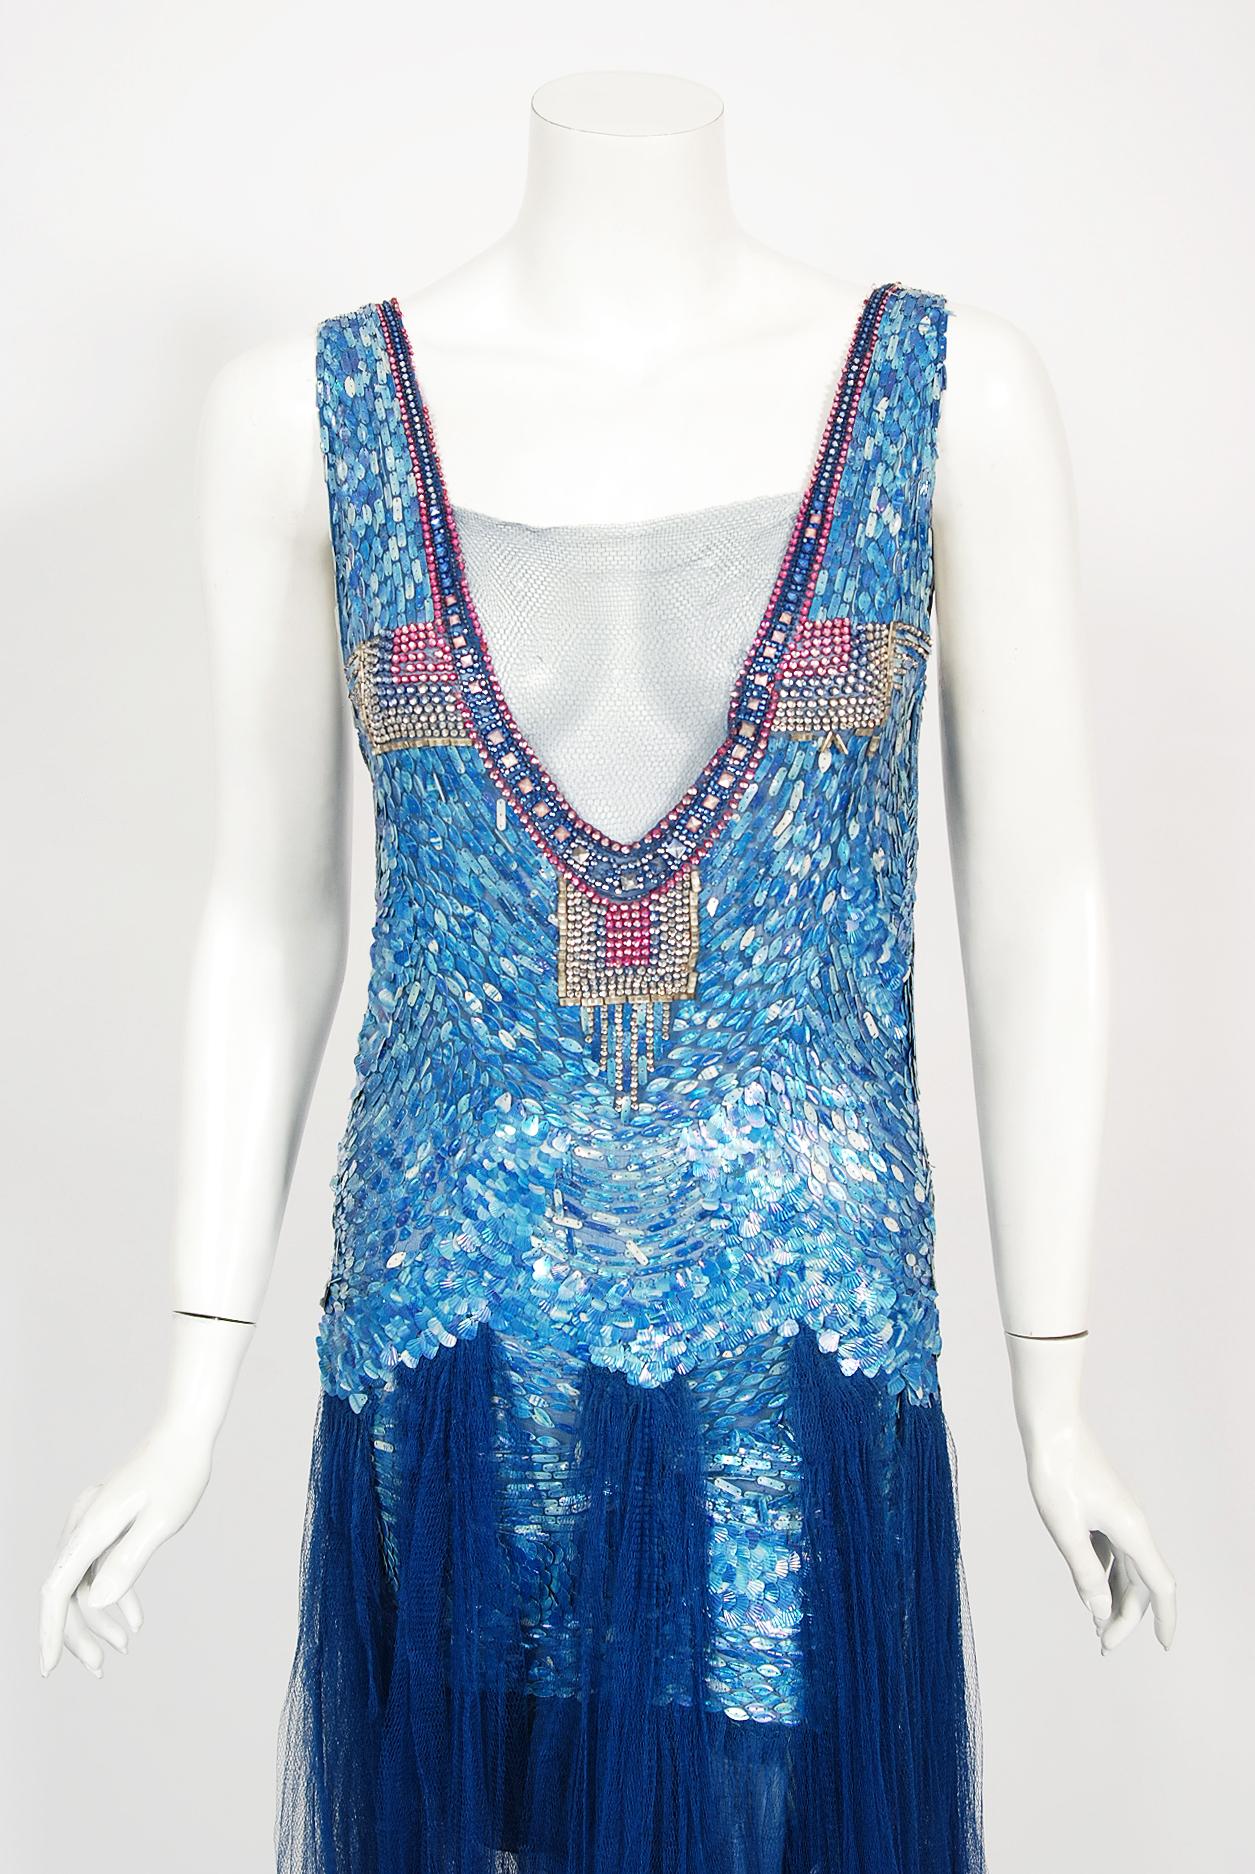 Breathtaking French museum quality sparkling net-tulle mermaid flapper gown dating back to the mid 1920's. The royal blue color palette touches a deep chord in our collective aesthetic consciousness. As fashion lovers, we never tire from antique